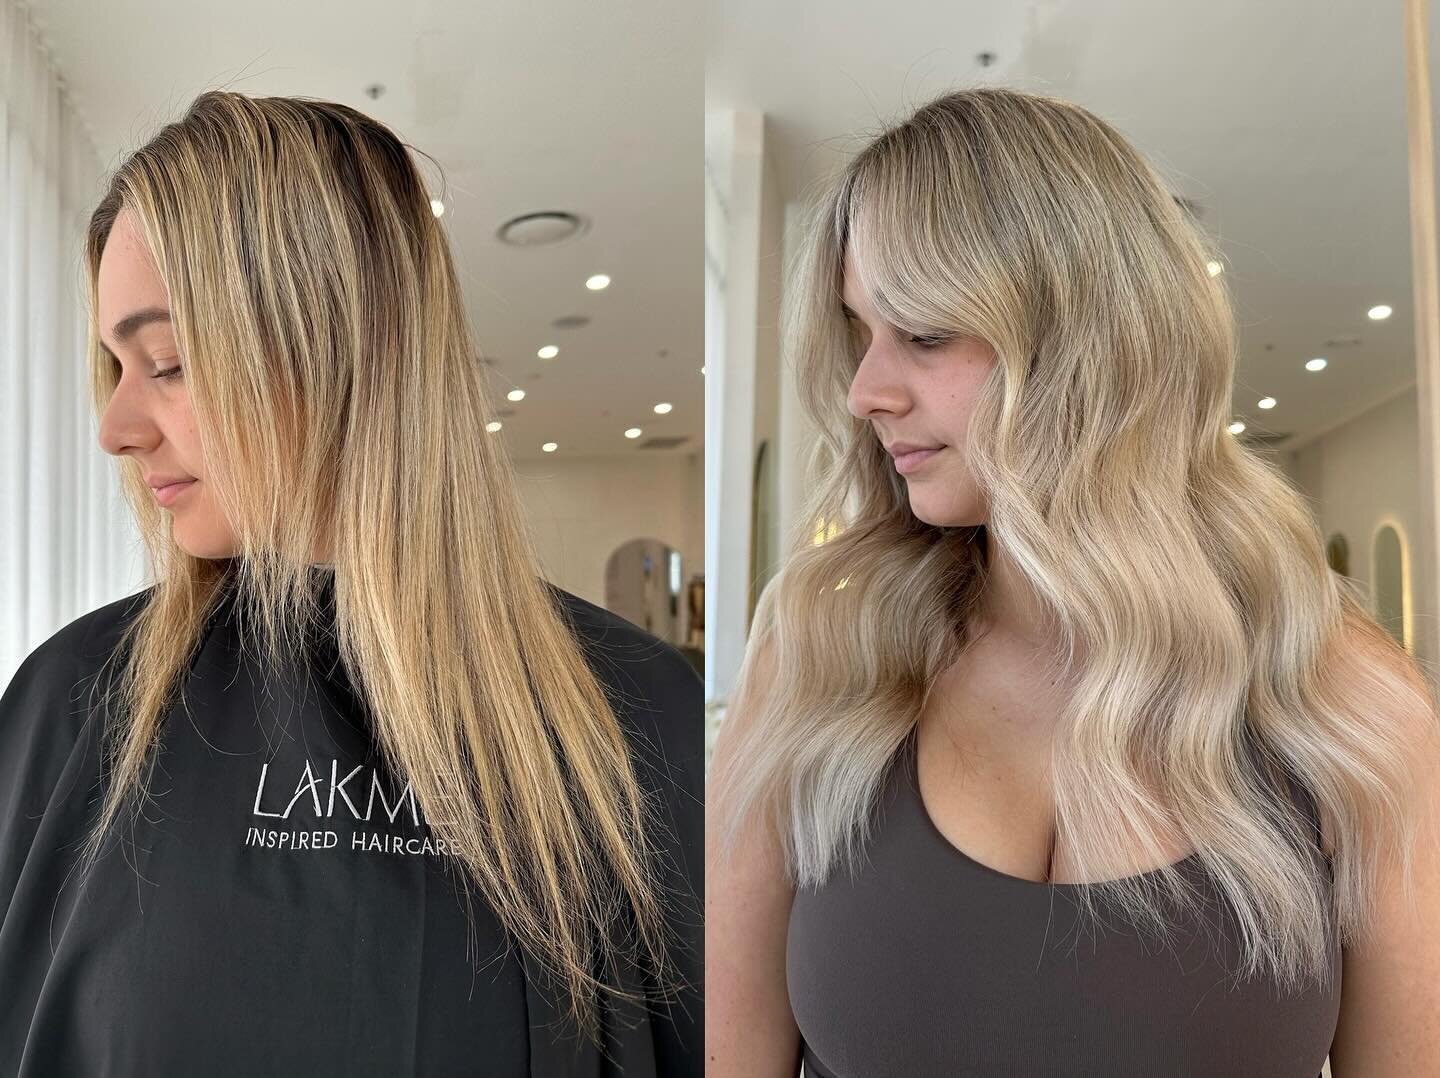 New Year, New Hair

Adding one row of wefts to create volume and a full head of foils means a majorrr hair transformation 🫶

#blonde #blondehair #hairextensions #weftextensions #yovankaloria #yovankaloriaextensions #hairtransformation #hairgoals #ha